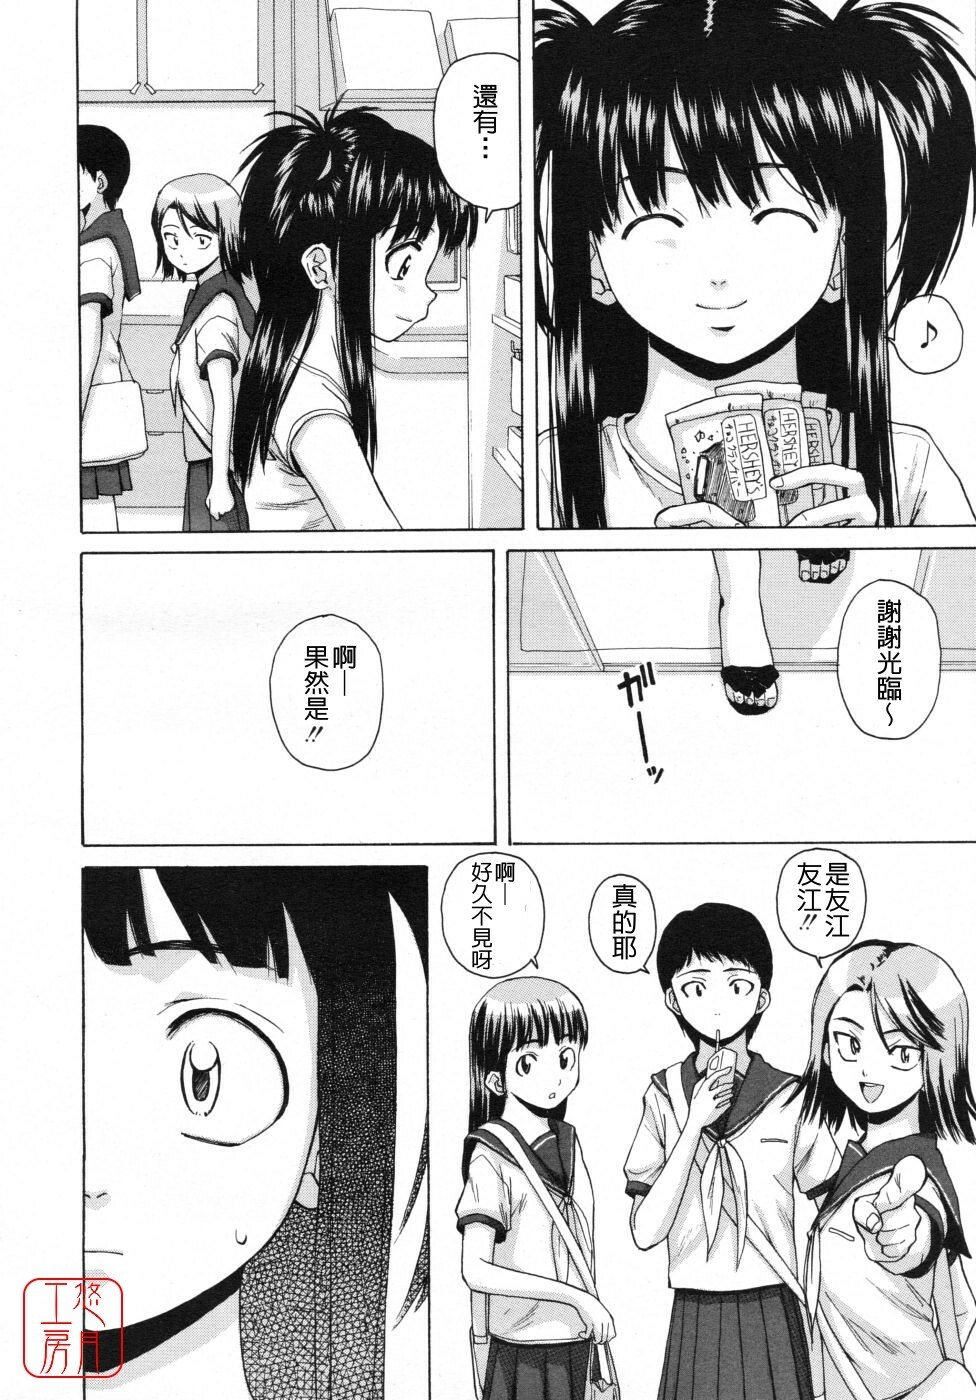 [Fuuga] Girl Friend 2 (Chinese) page 8 full